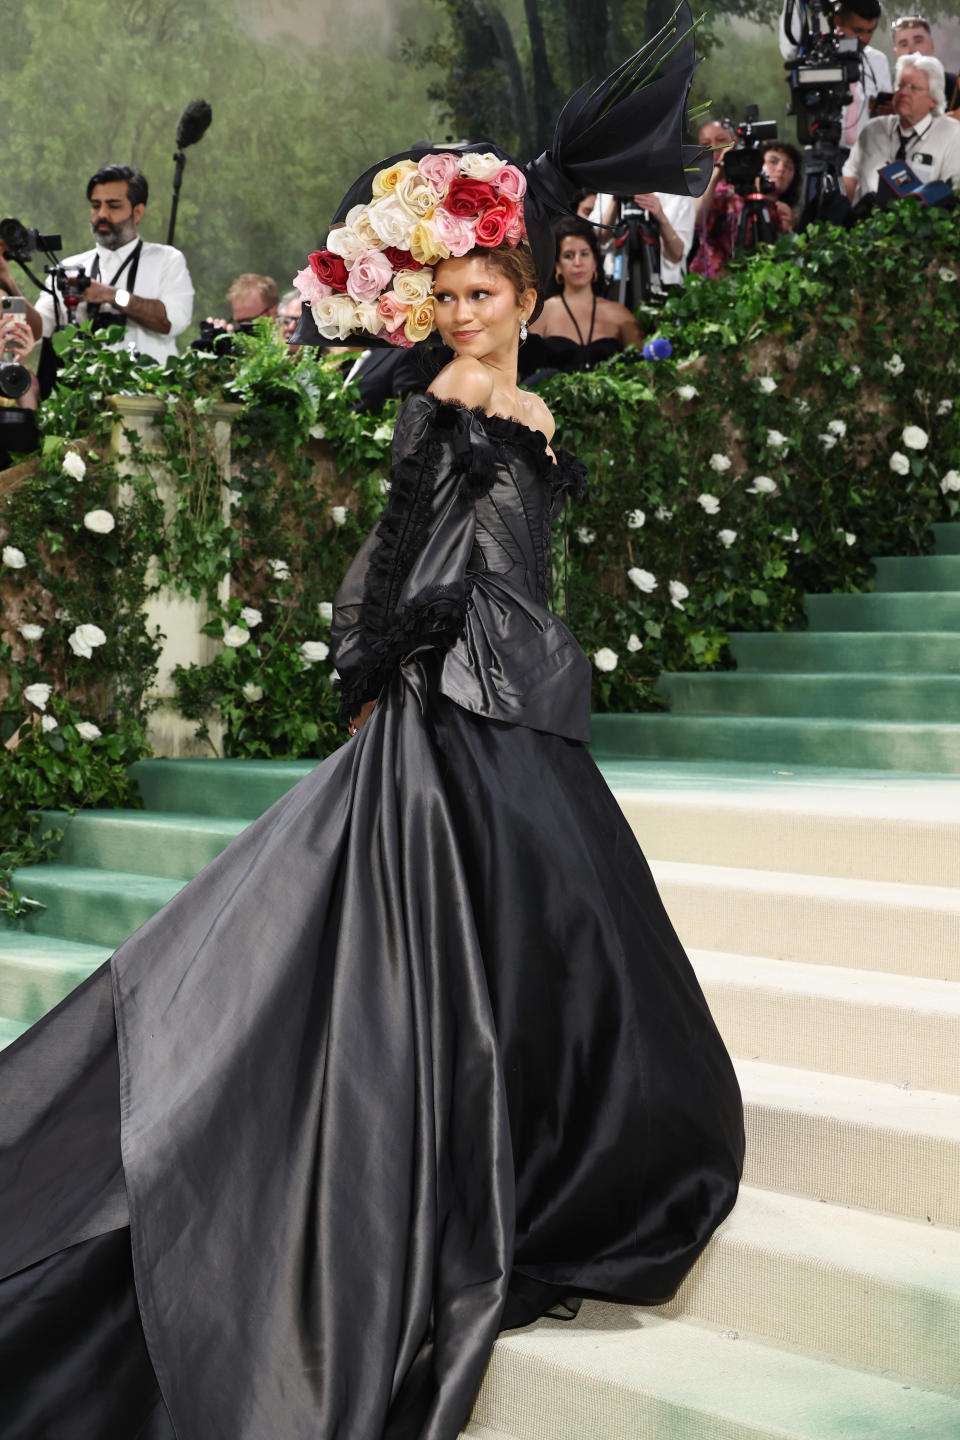 Zendaya with a flower hat on the Met Gala red carpet stairs.